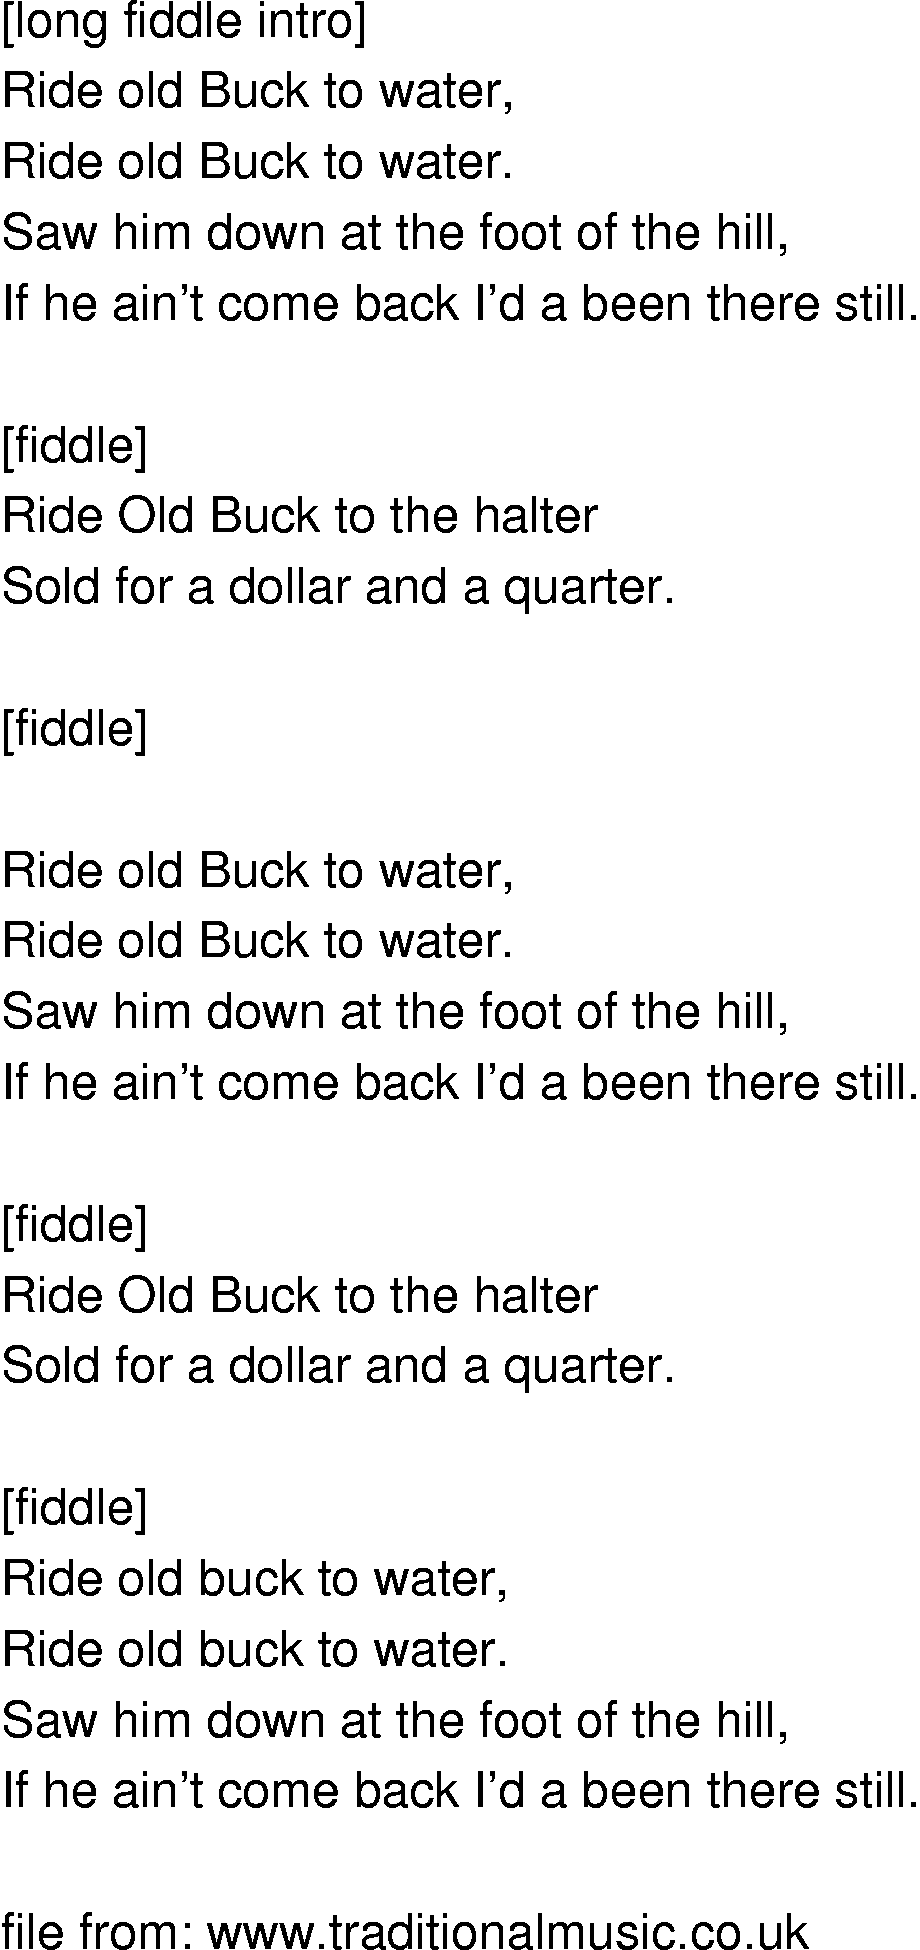 Old-Time (oldtimey) Song Lyrics - ride old buck to water